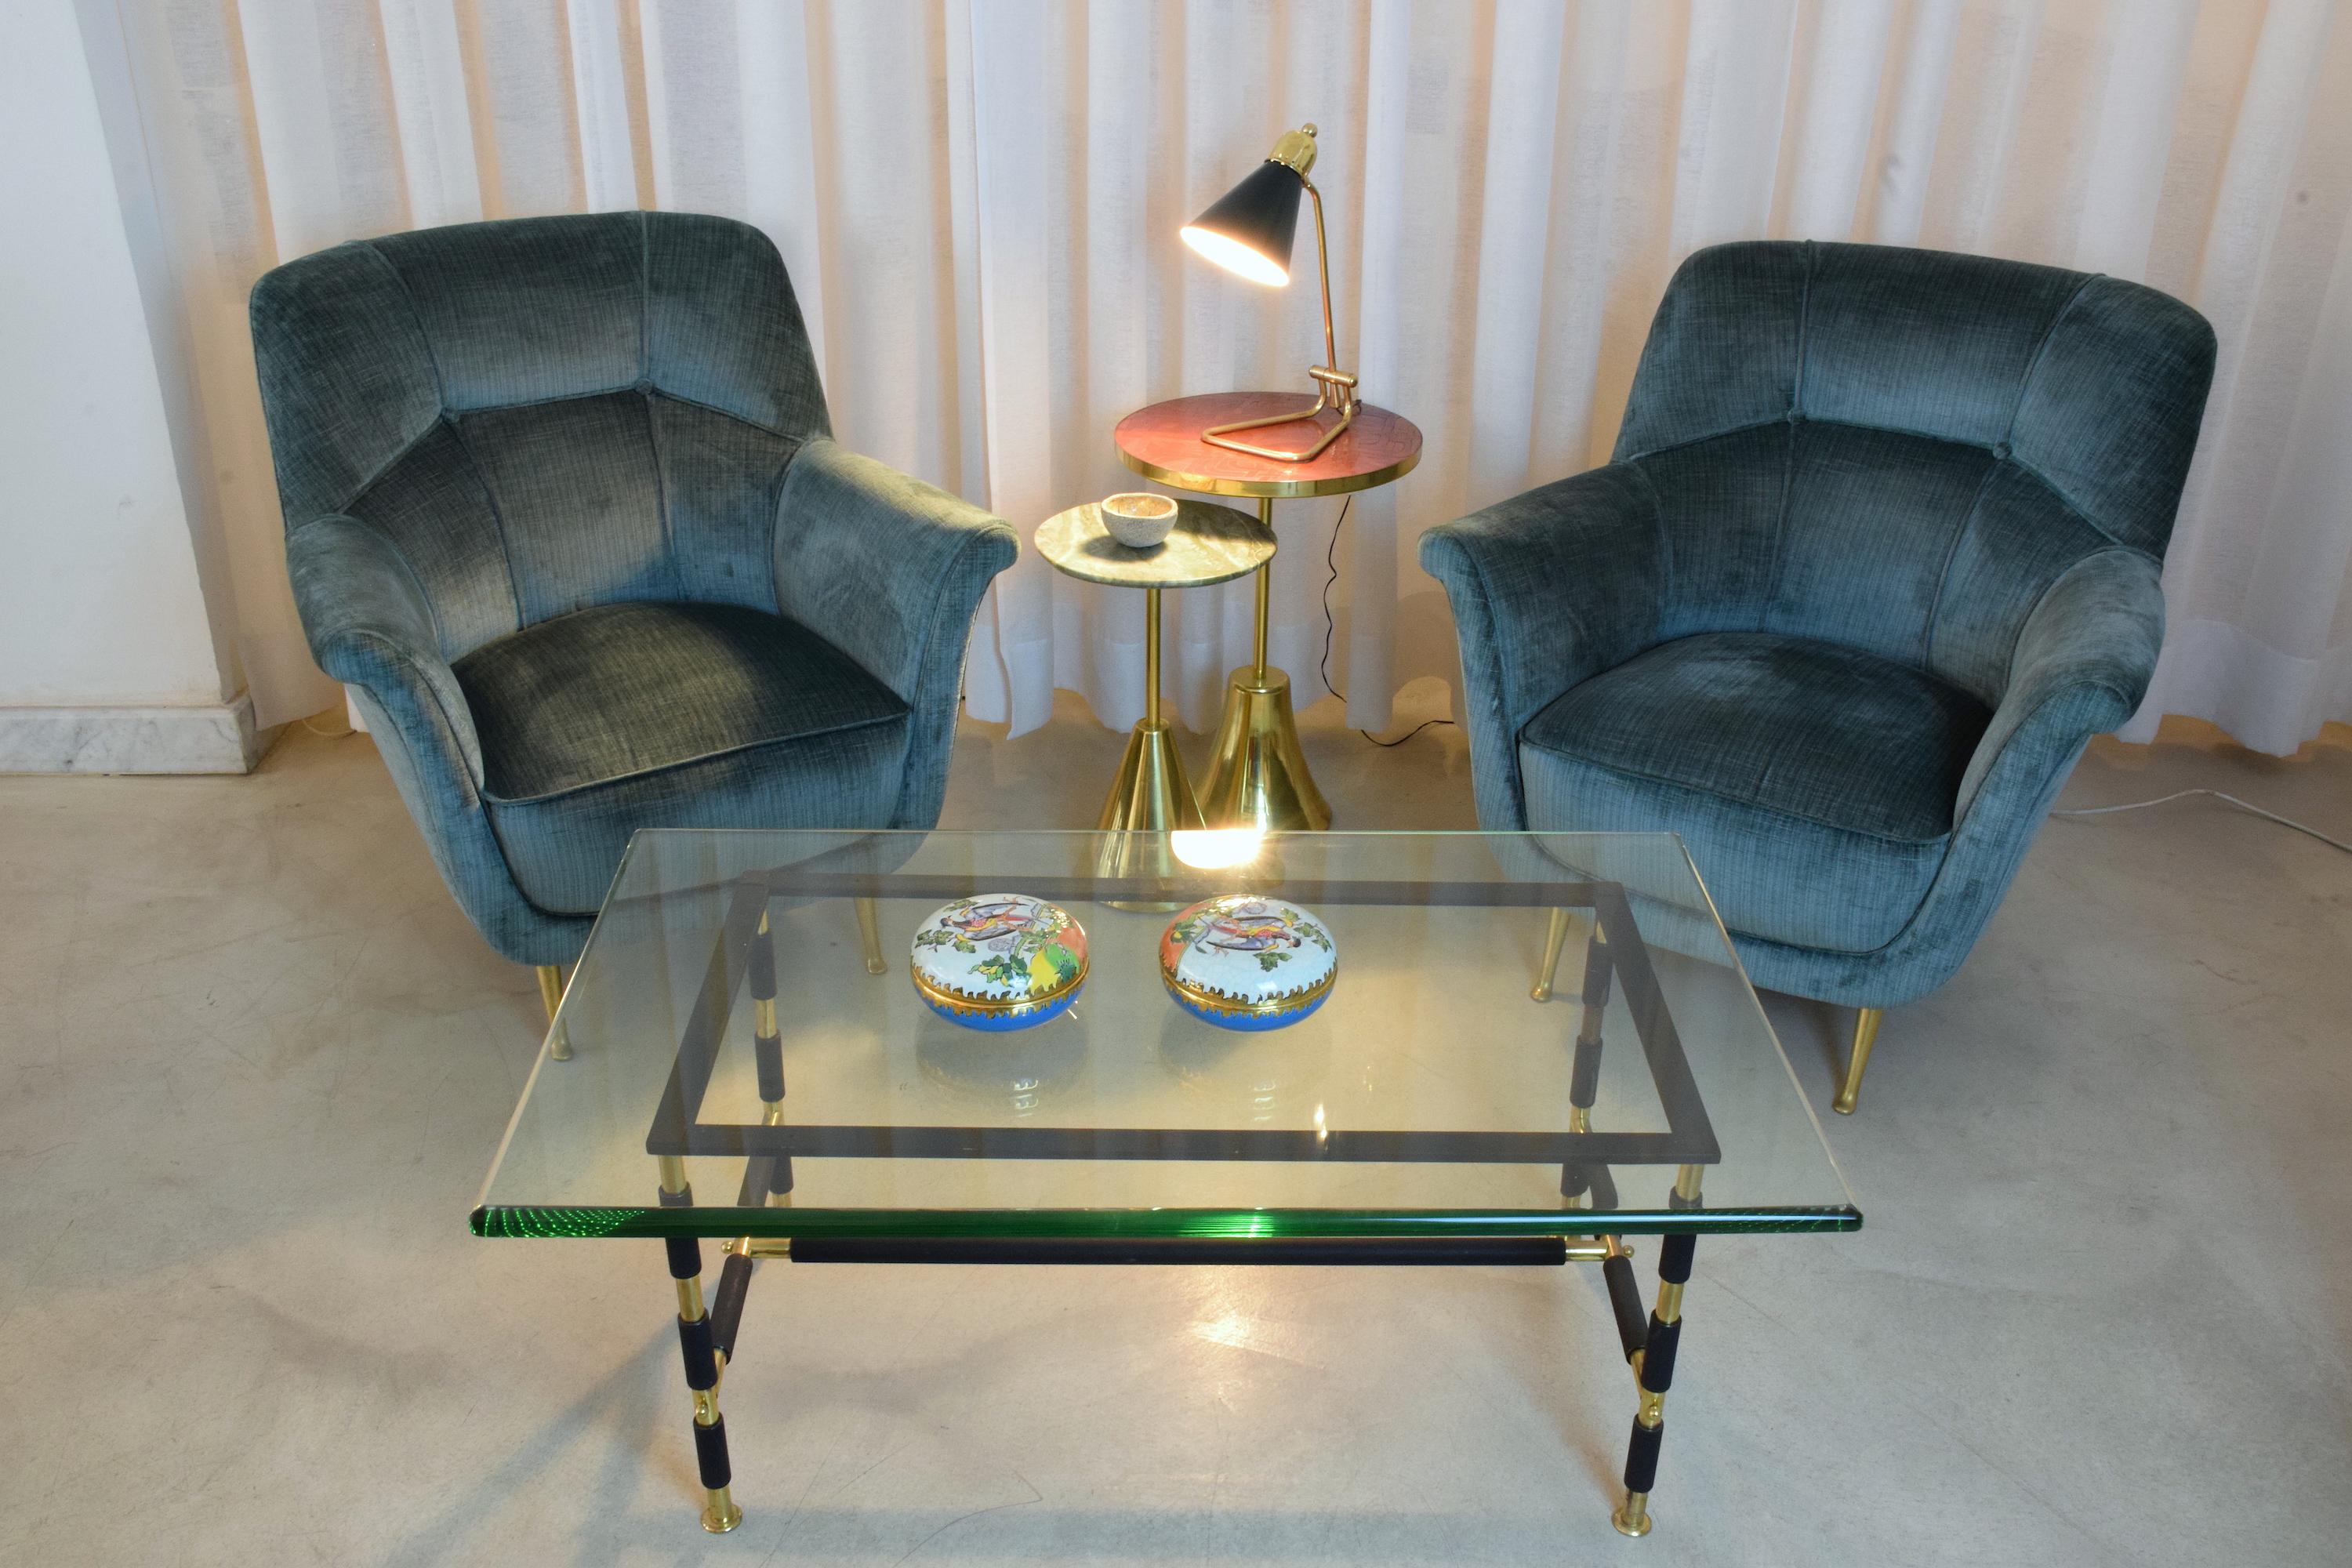 A 20th century vintage table, desk or accent lamp designed by the iconic French designer Robert Mathieu in the 1950s. The lamp is adjustable at the shade which has been fully restored through brass polishing and re-lacquering of the shade. The brass